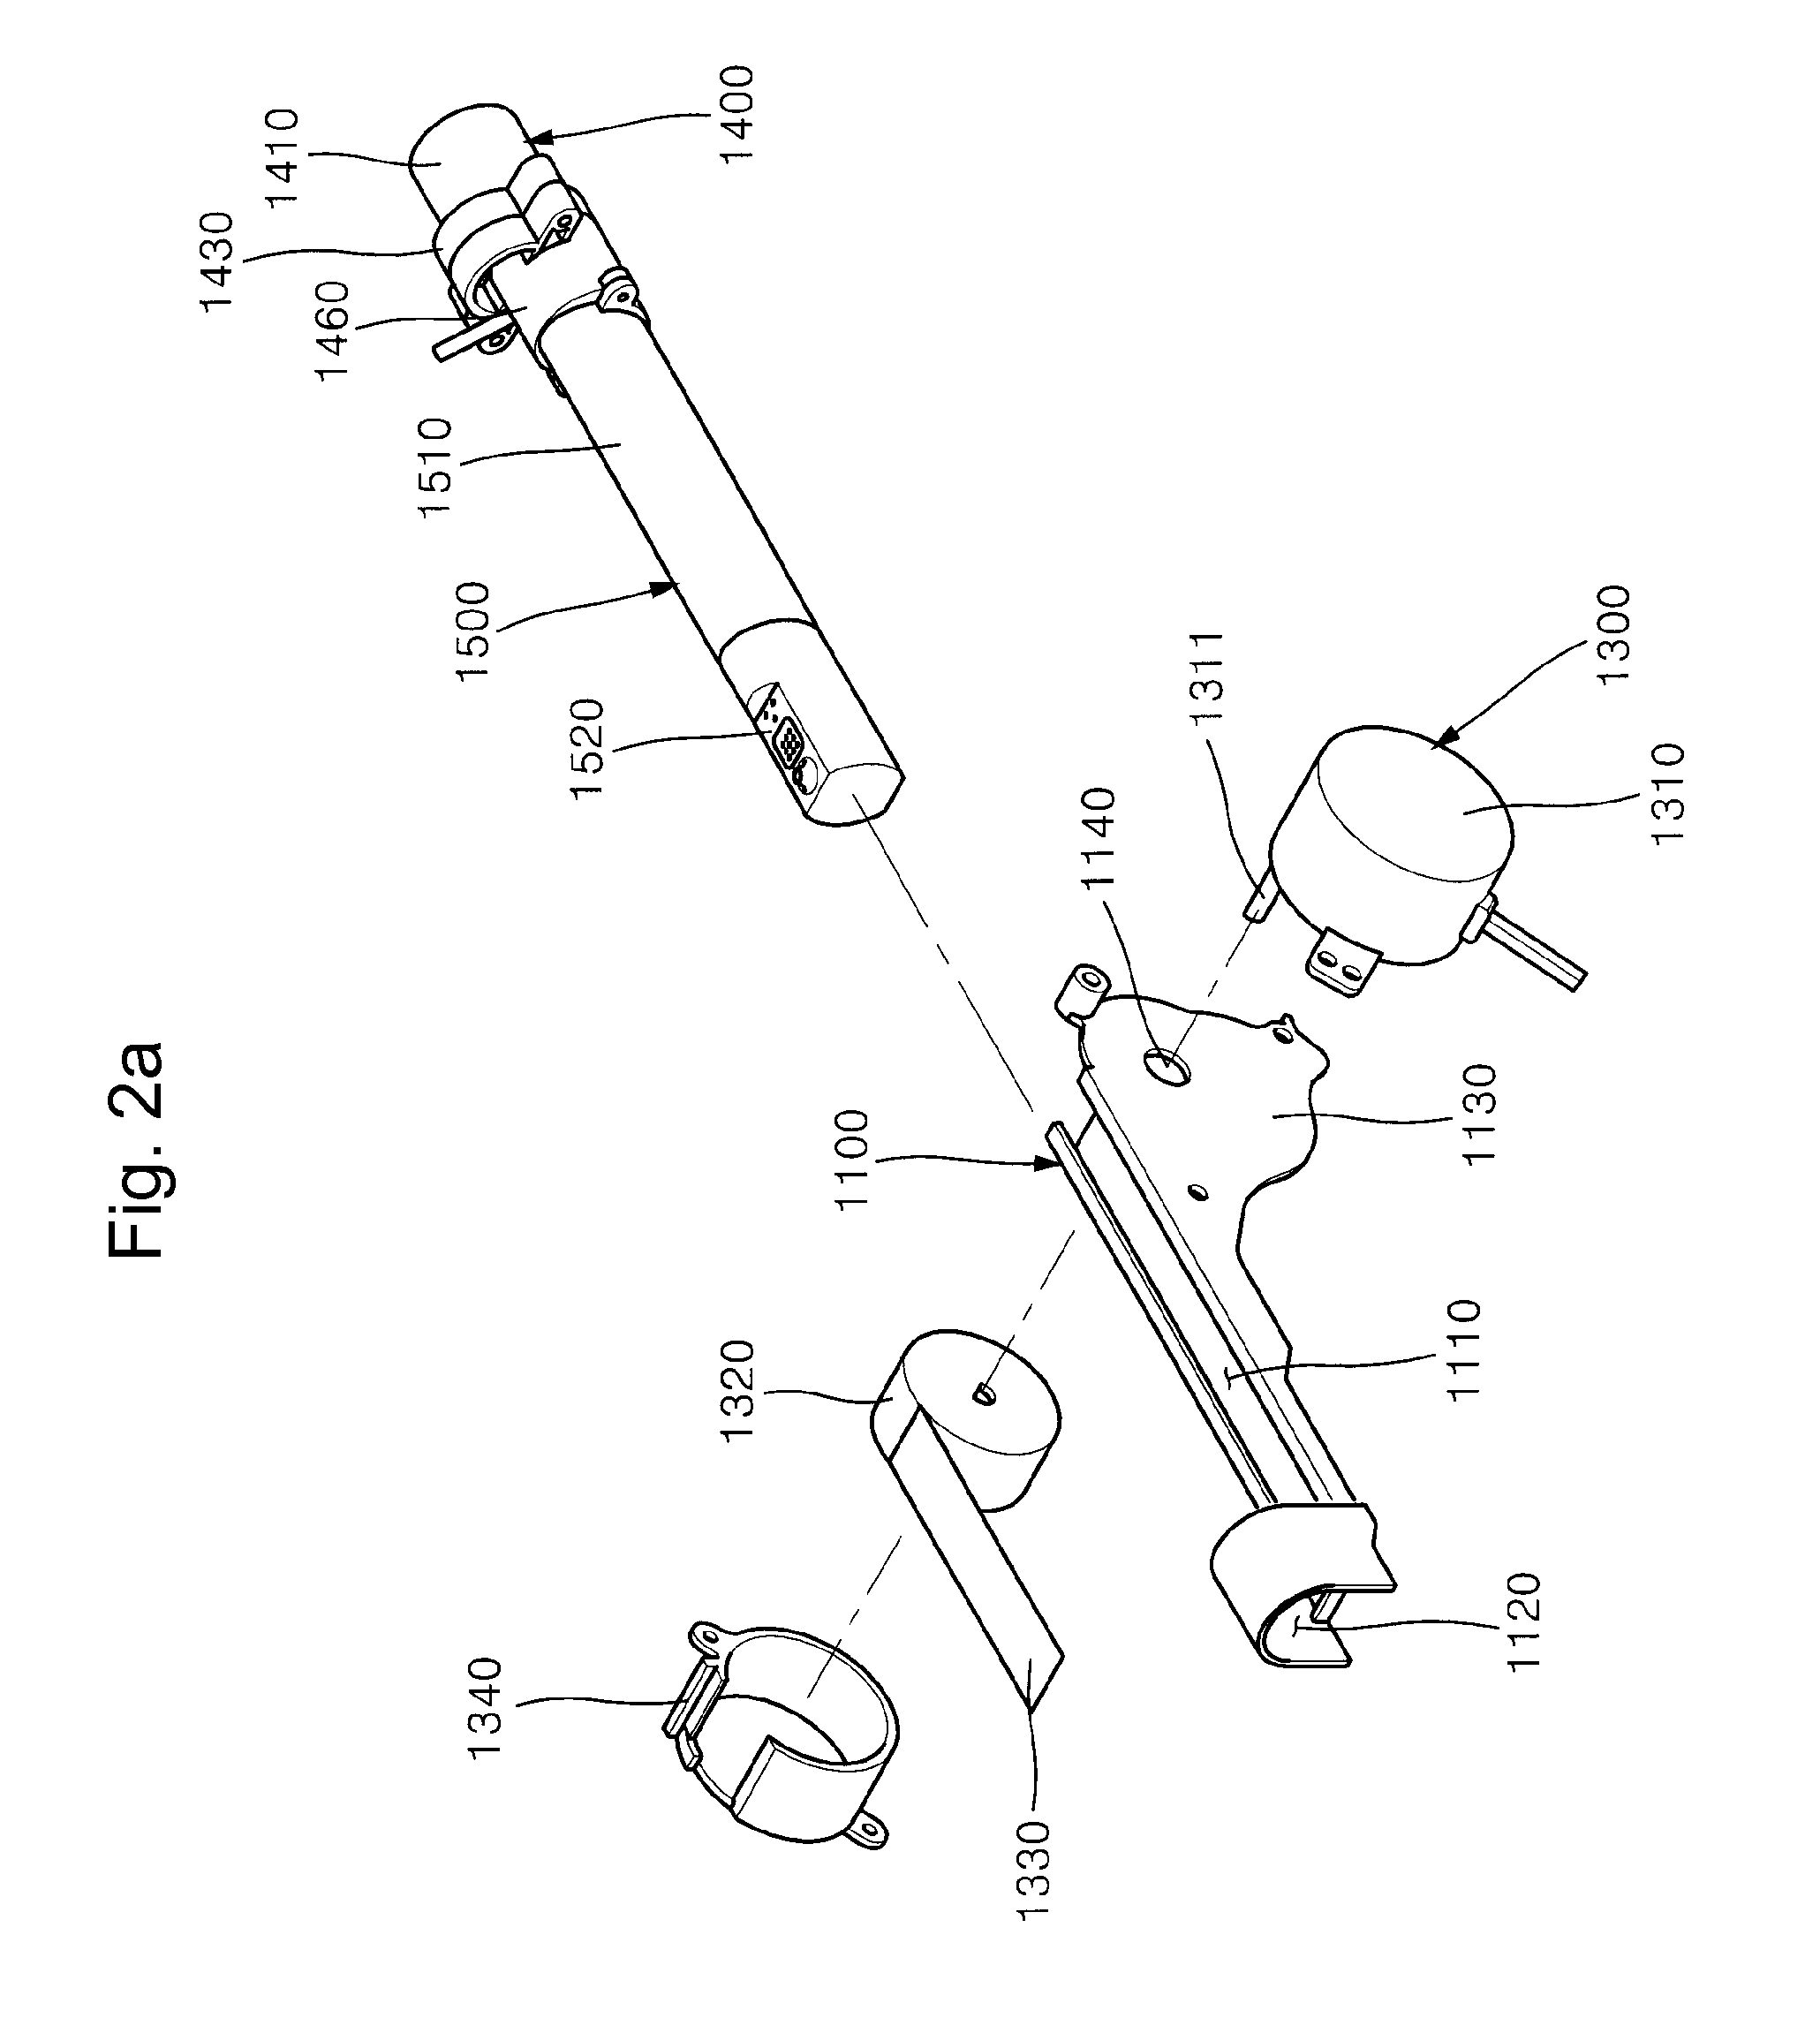 Spray nozzle structure for a bidet having an enema function